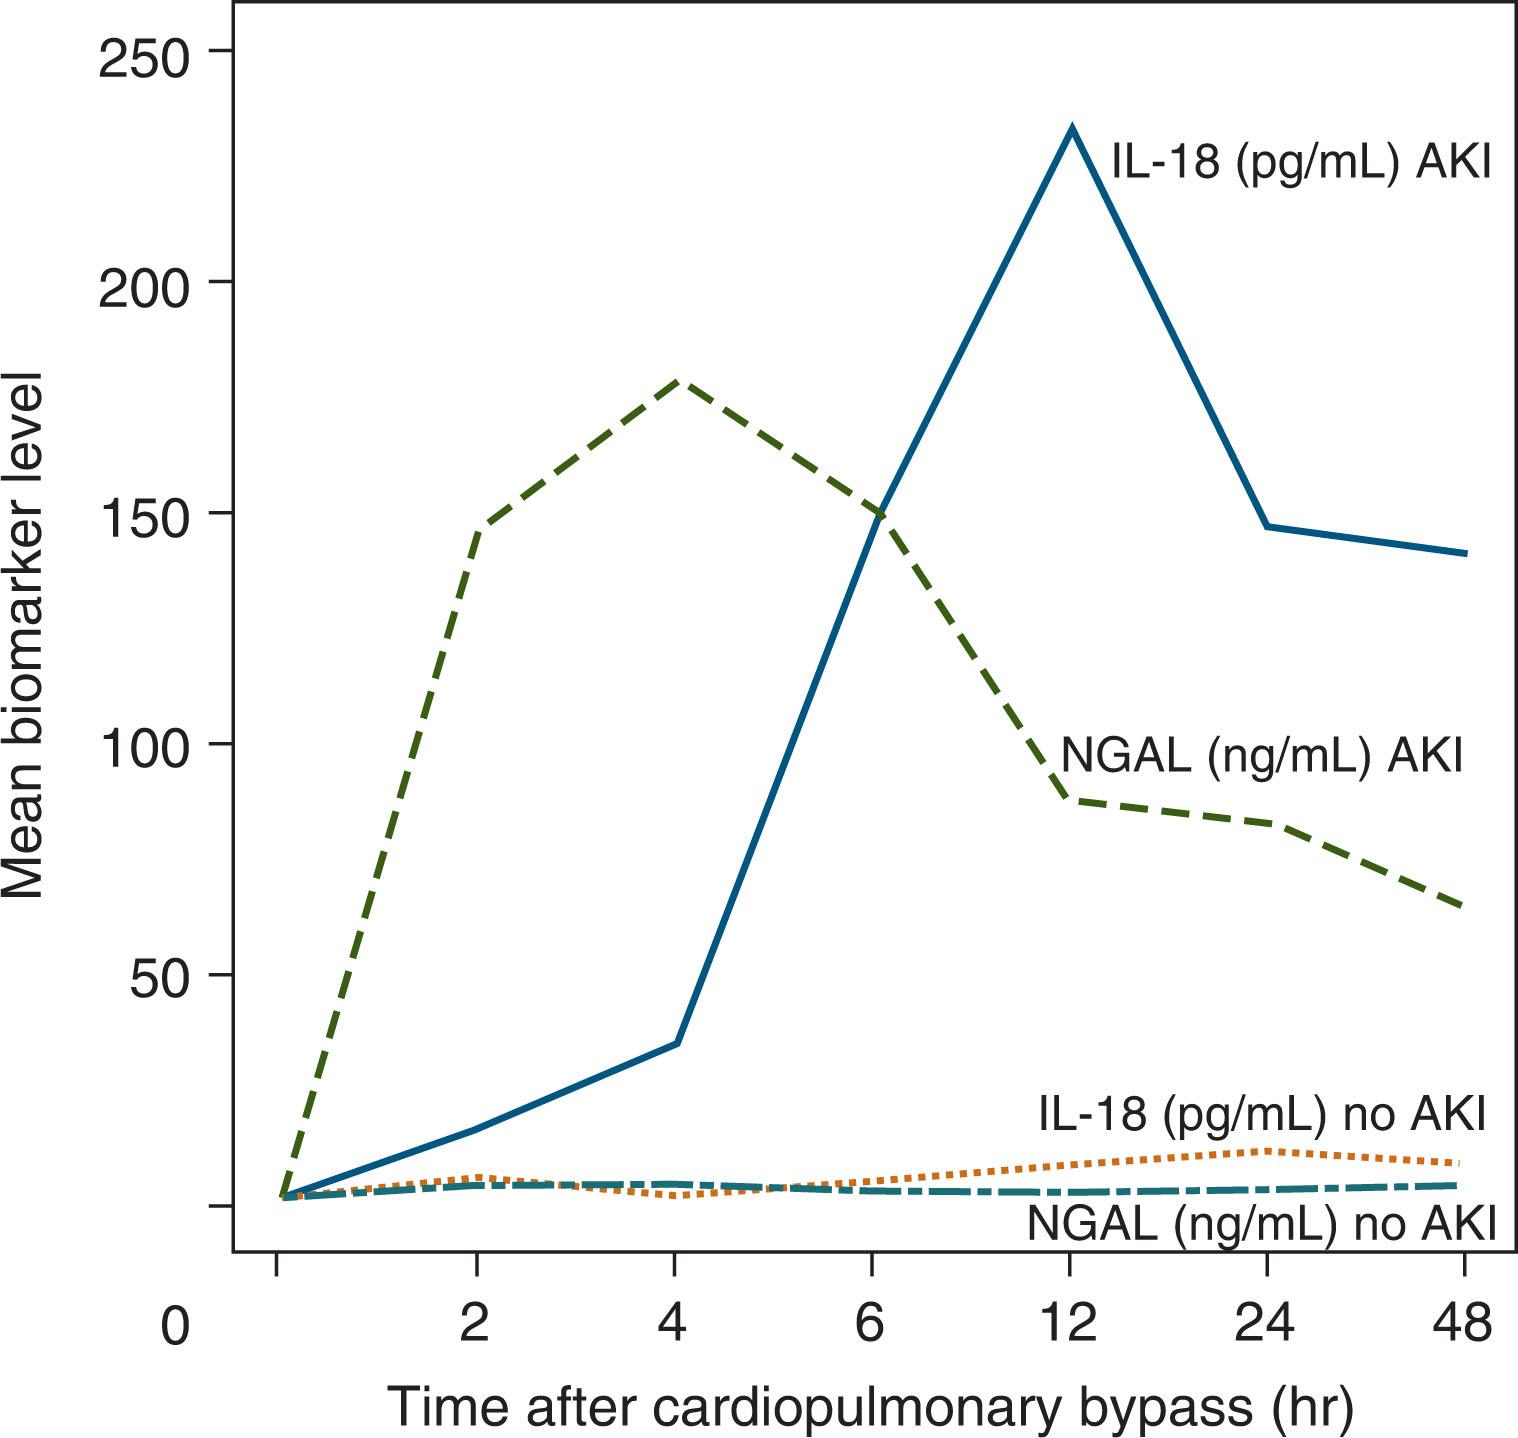 Fig. 77.1, Mean values of urine interleukin-18 (pg/mL) and neutrophil gelatinase-associated lipocalin (ng/mL) over the first hours after cardiopulmonary bypass in infants who develop acute kidney injury (50% increase in serum creatinine) compared with those who did not develop acute kidney injury. AKI , Acute kidney injury; IL-18 , interleukin-18; NGAL , neutrophil gelatinase-associated lipocalin.